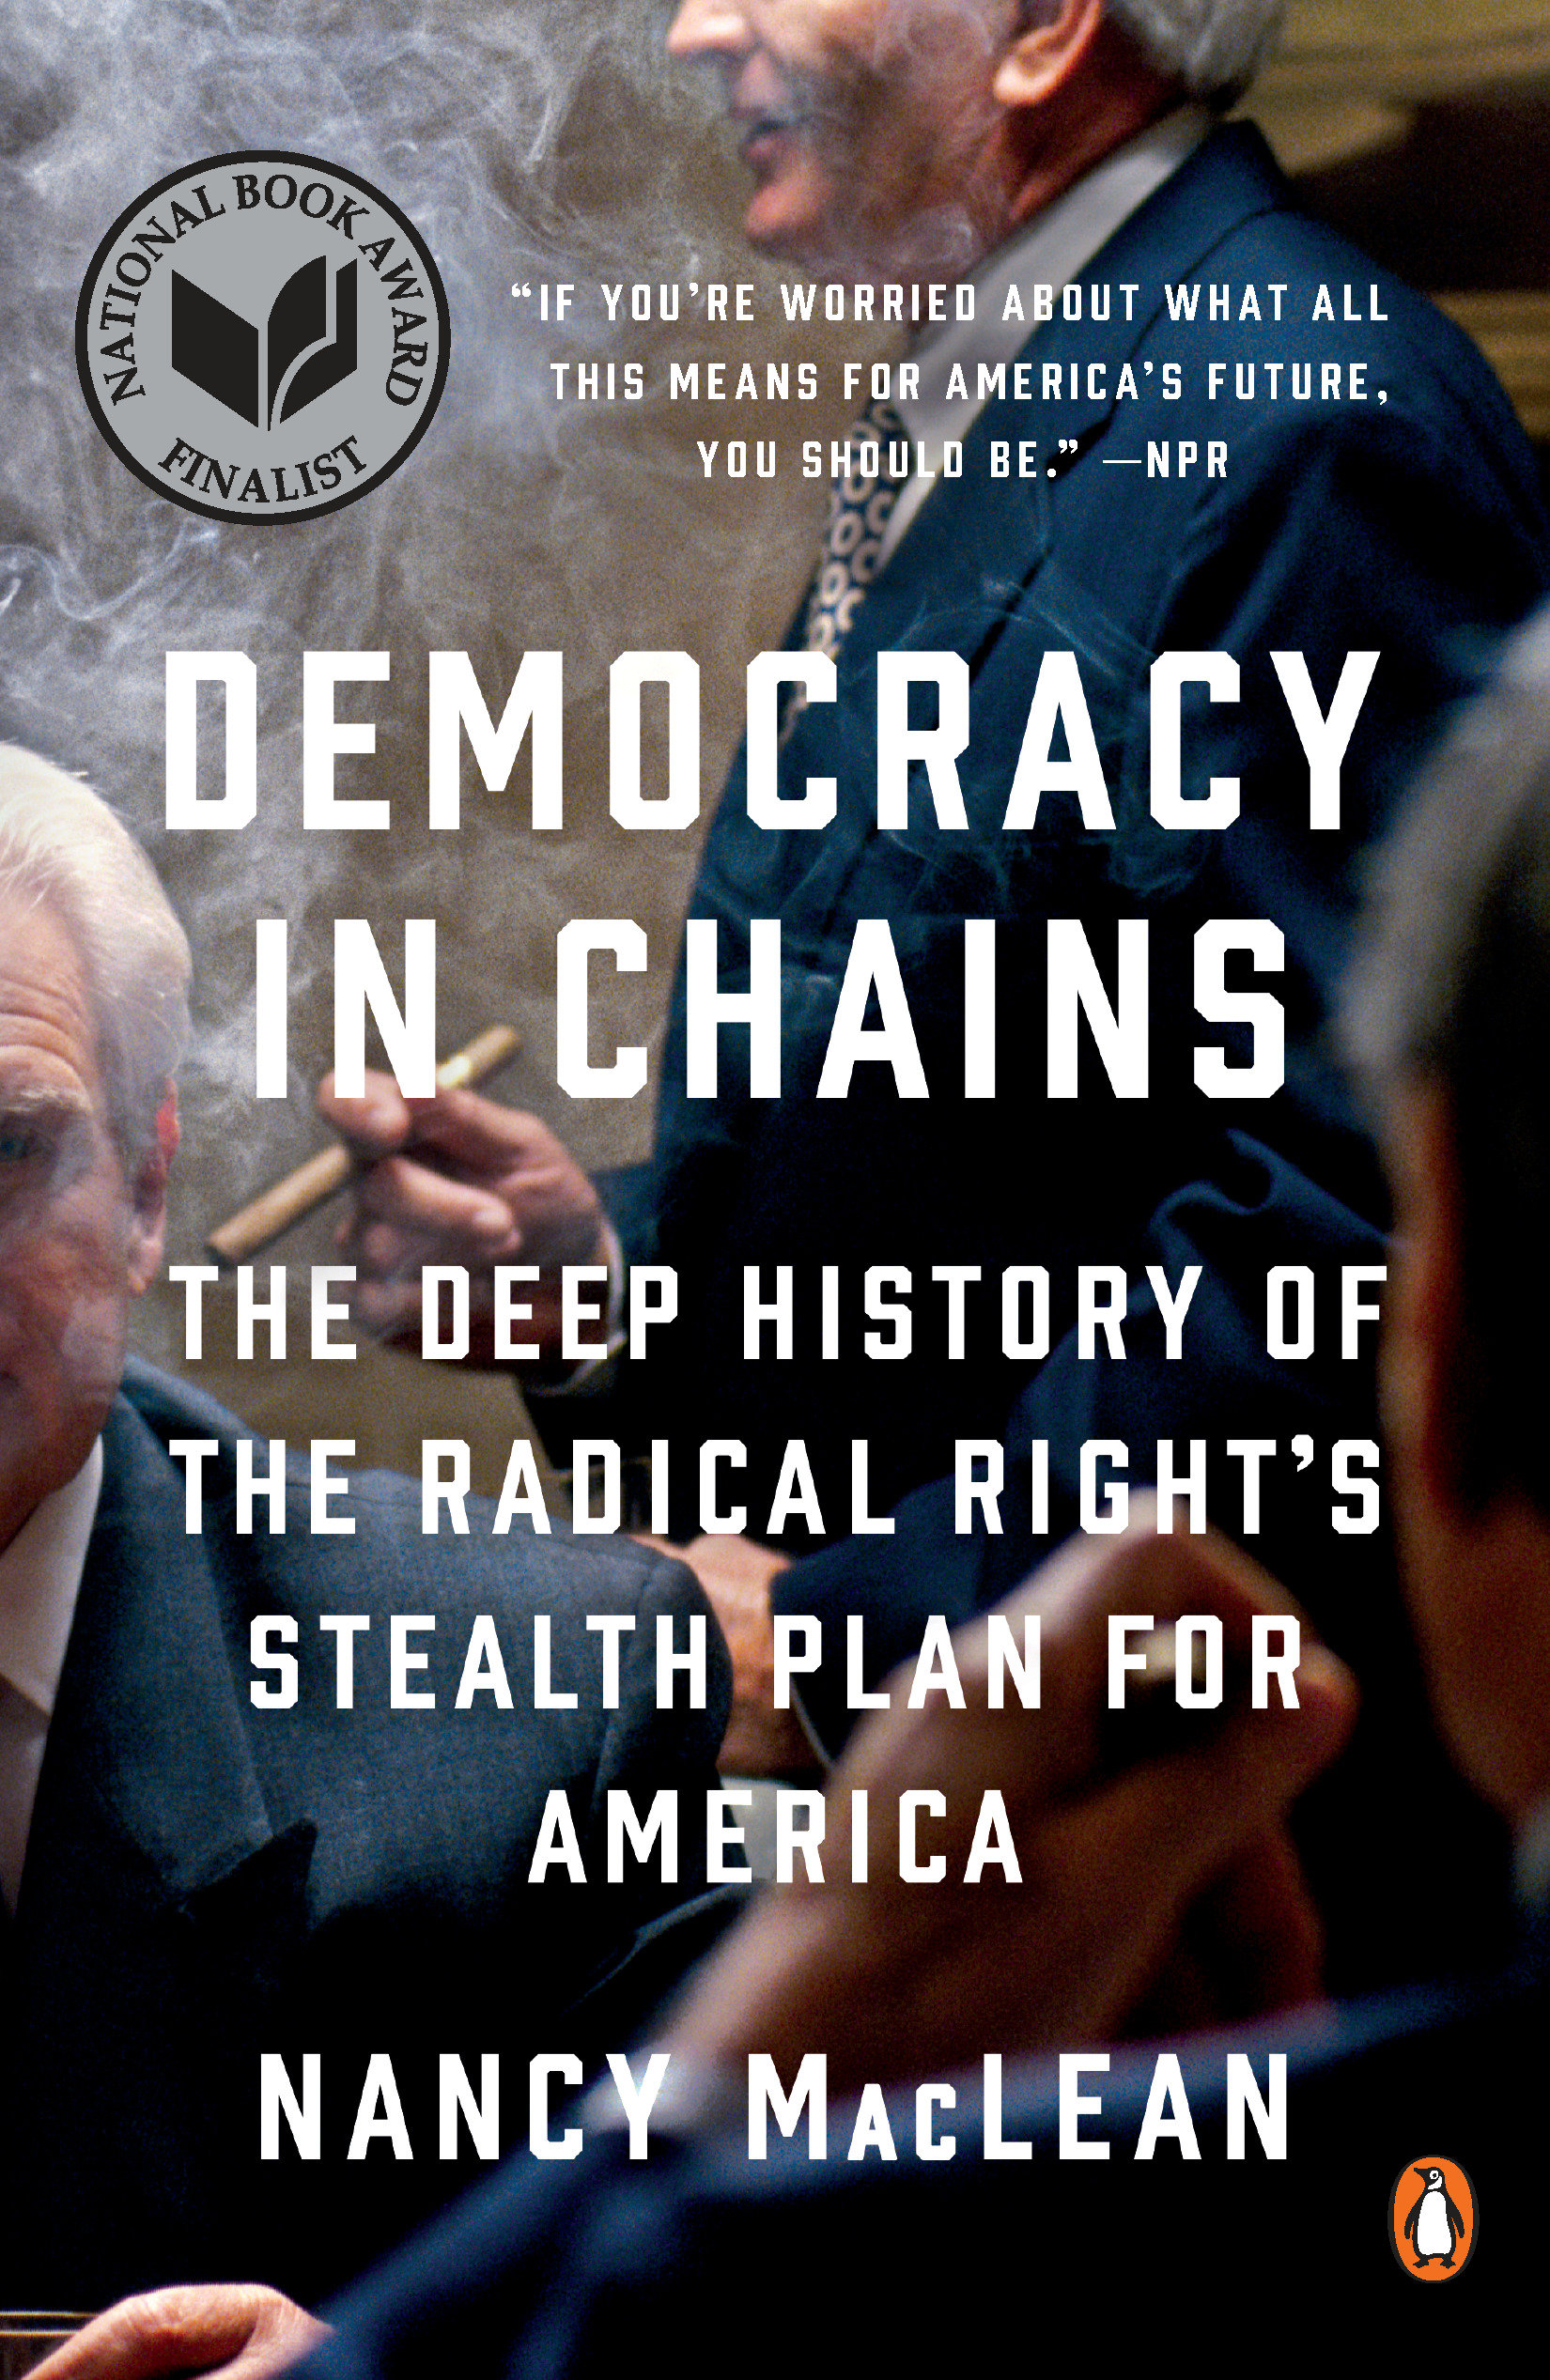 Democracy in chains the deep history of the radical right's stealth plan for America cover image